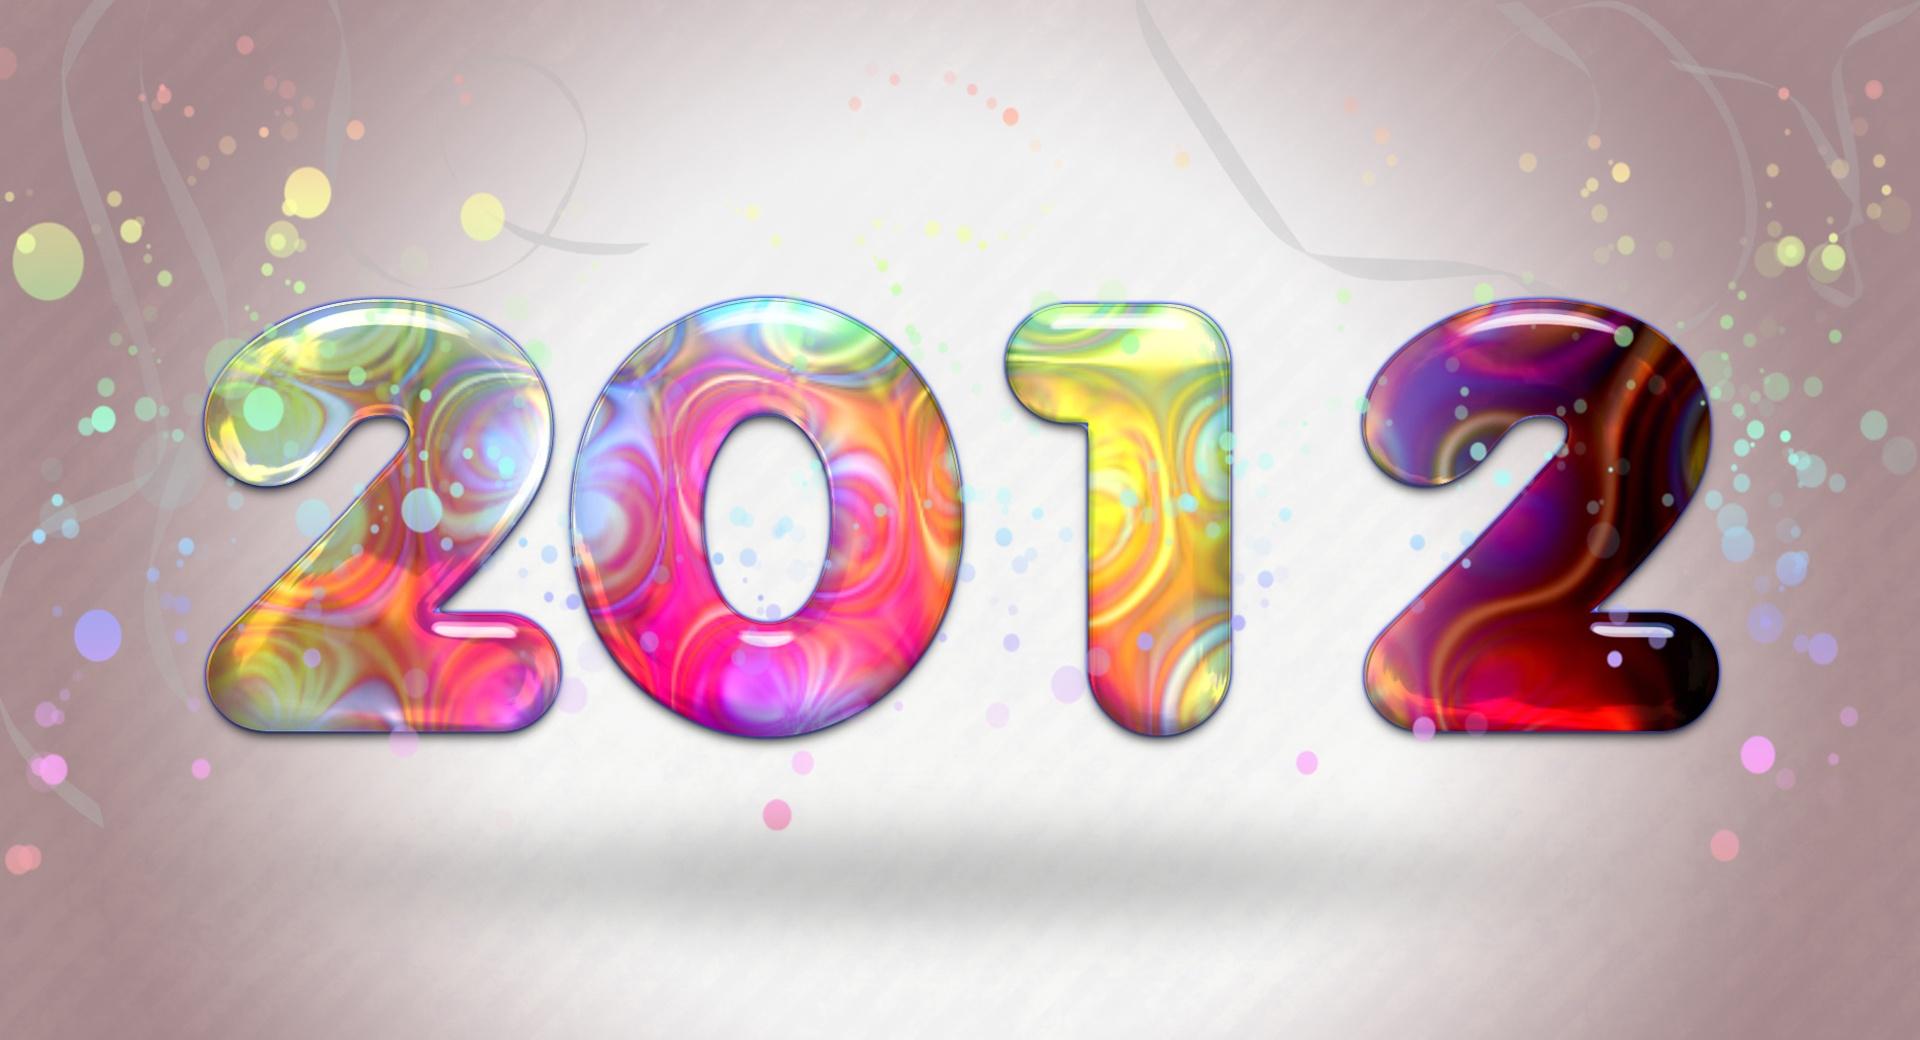 2012 Colorful New Year wallpapers HD quality